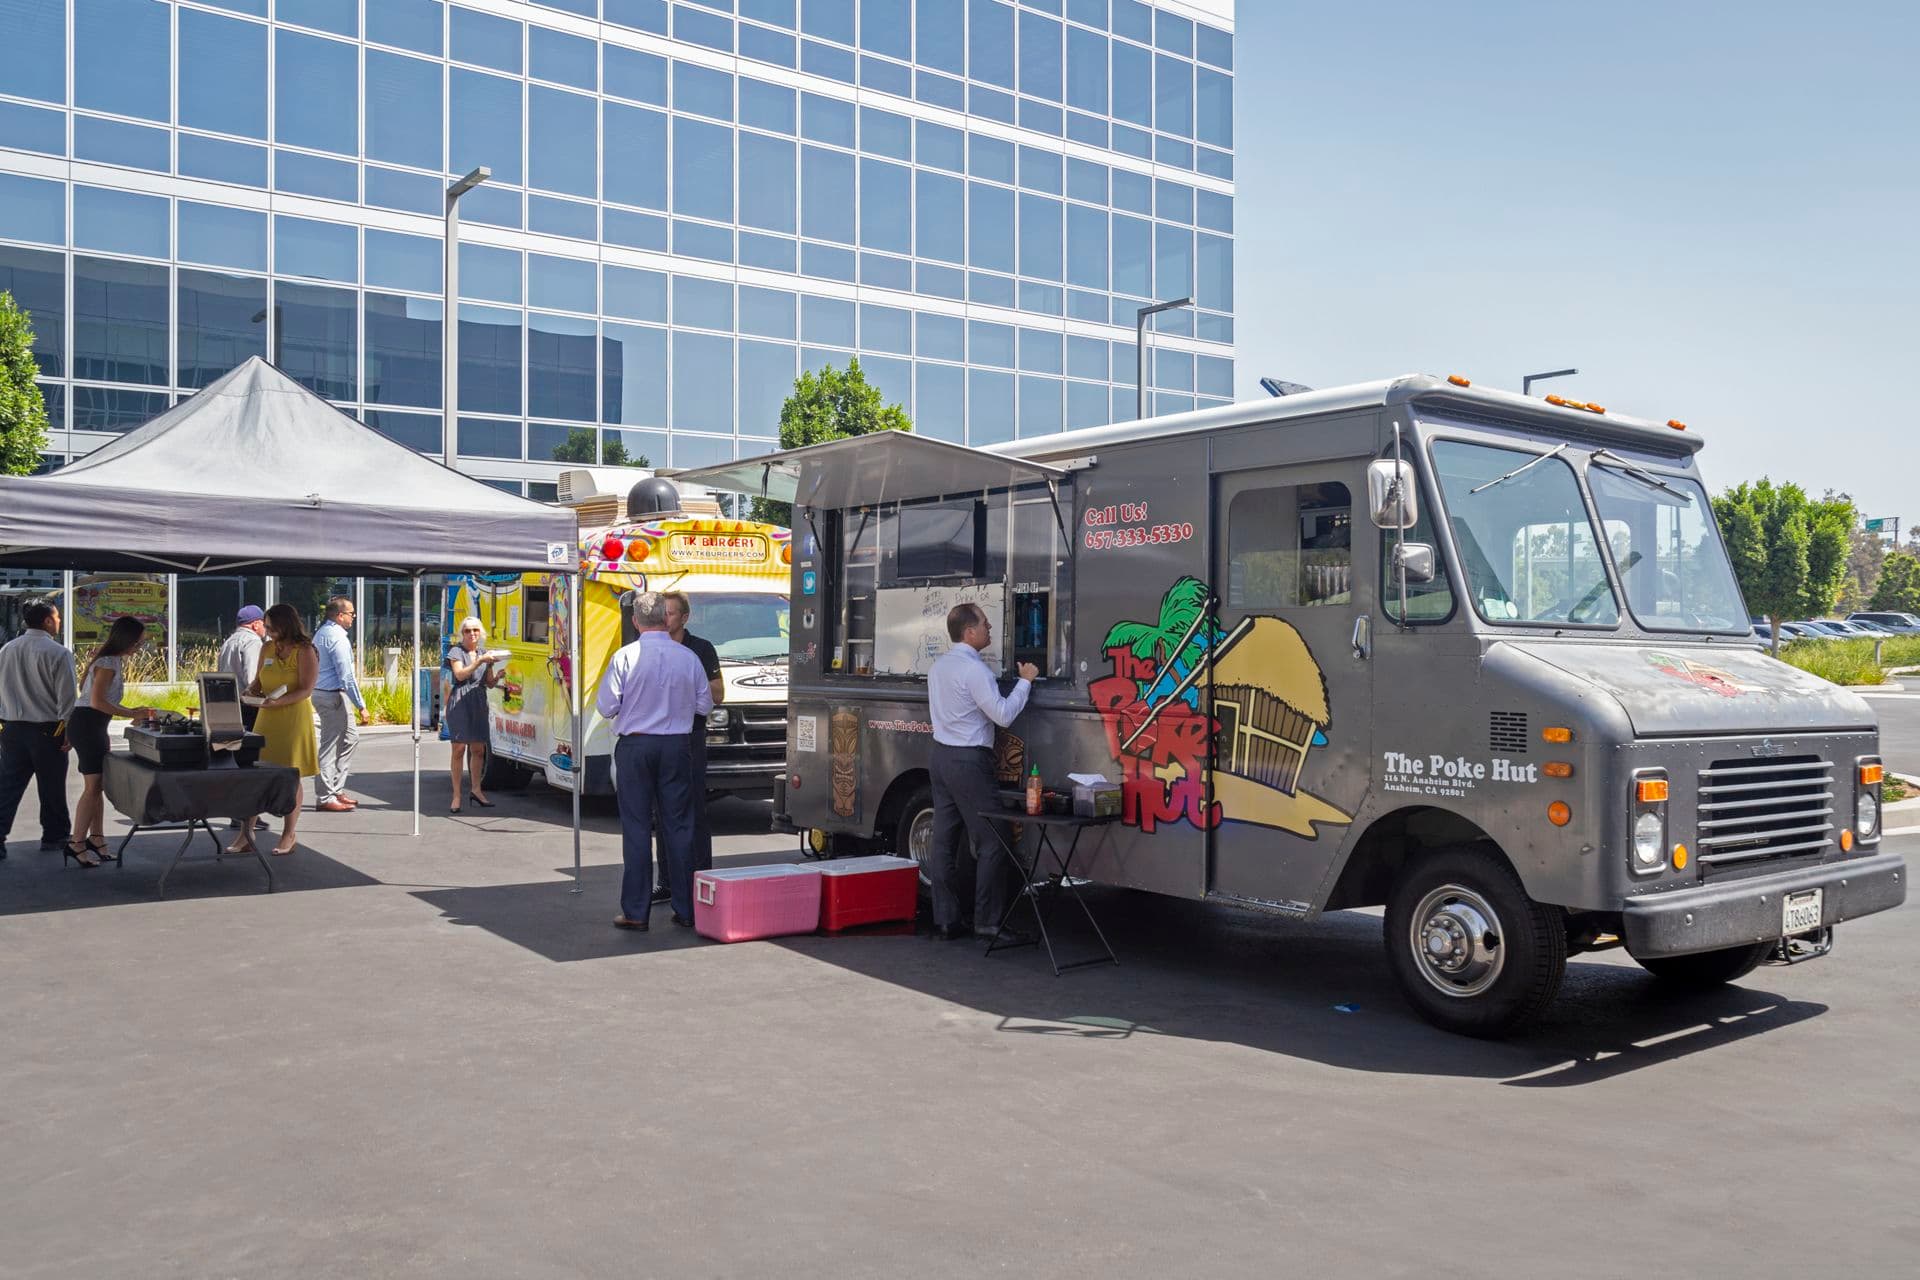 Photography of food trucks at The Quad - Discovery Park in Irvine, CA